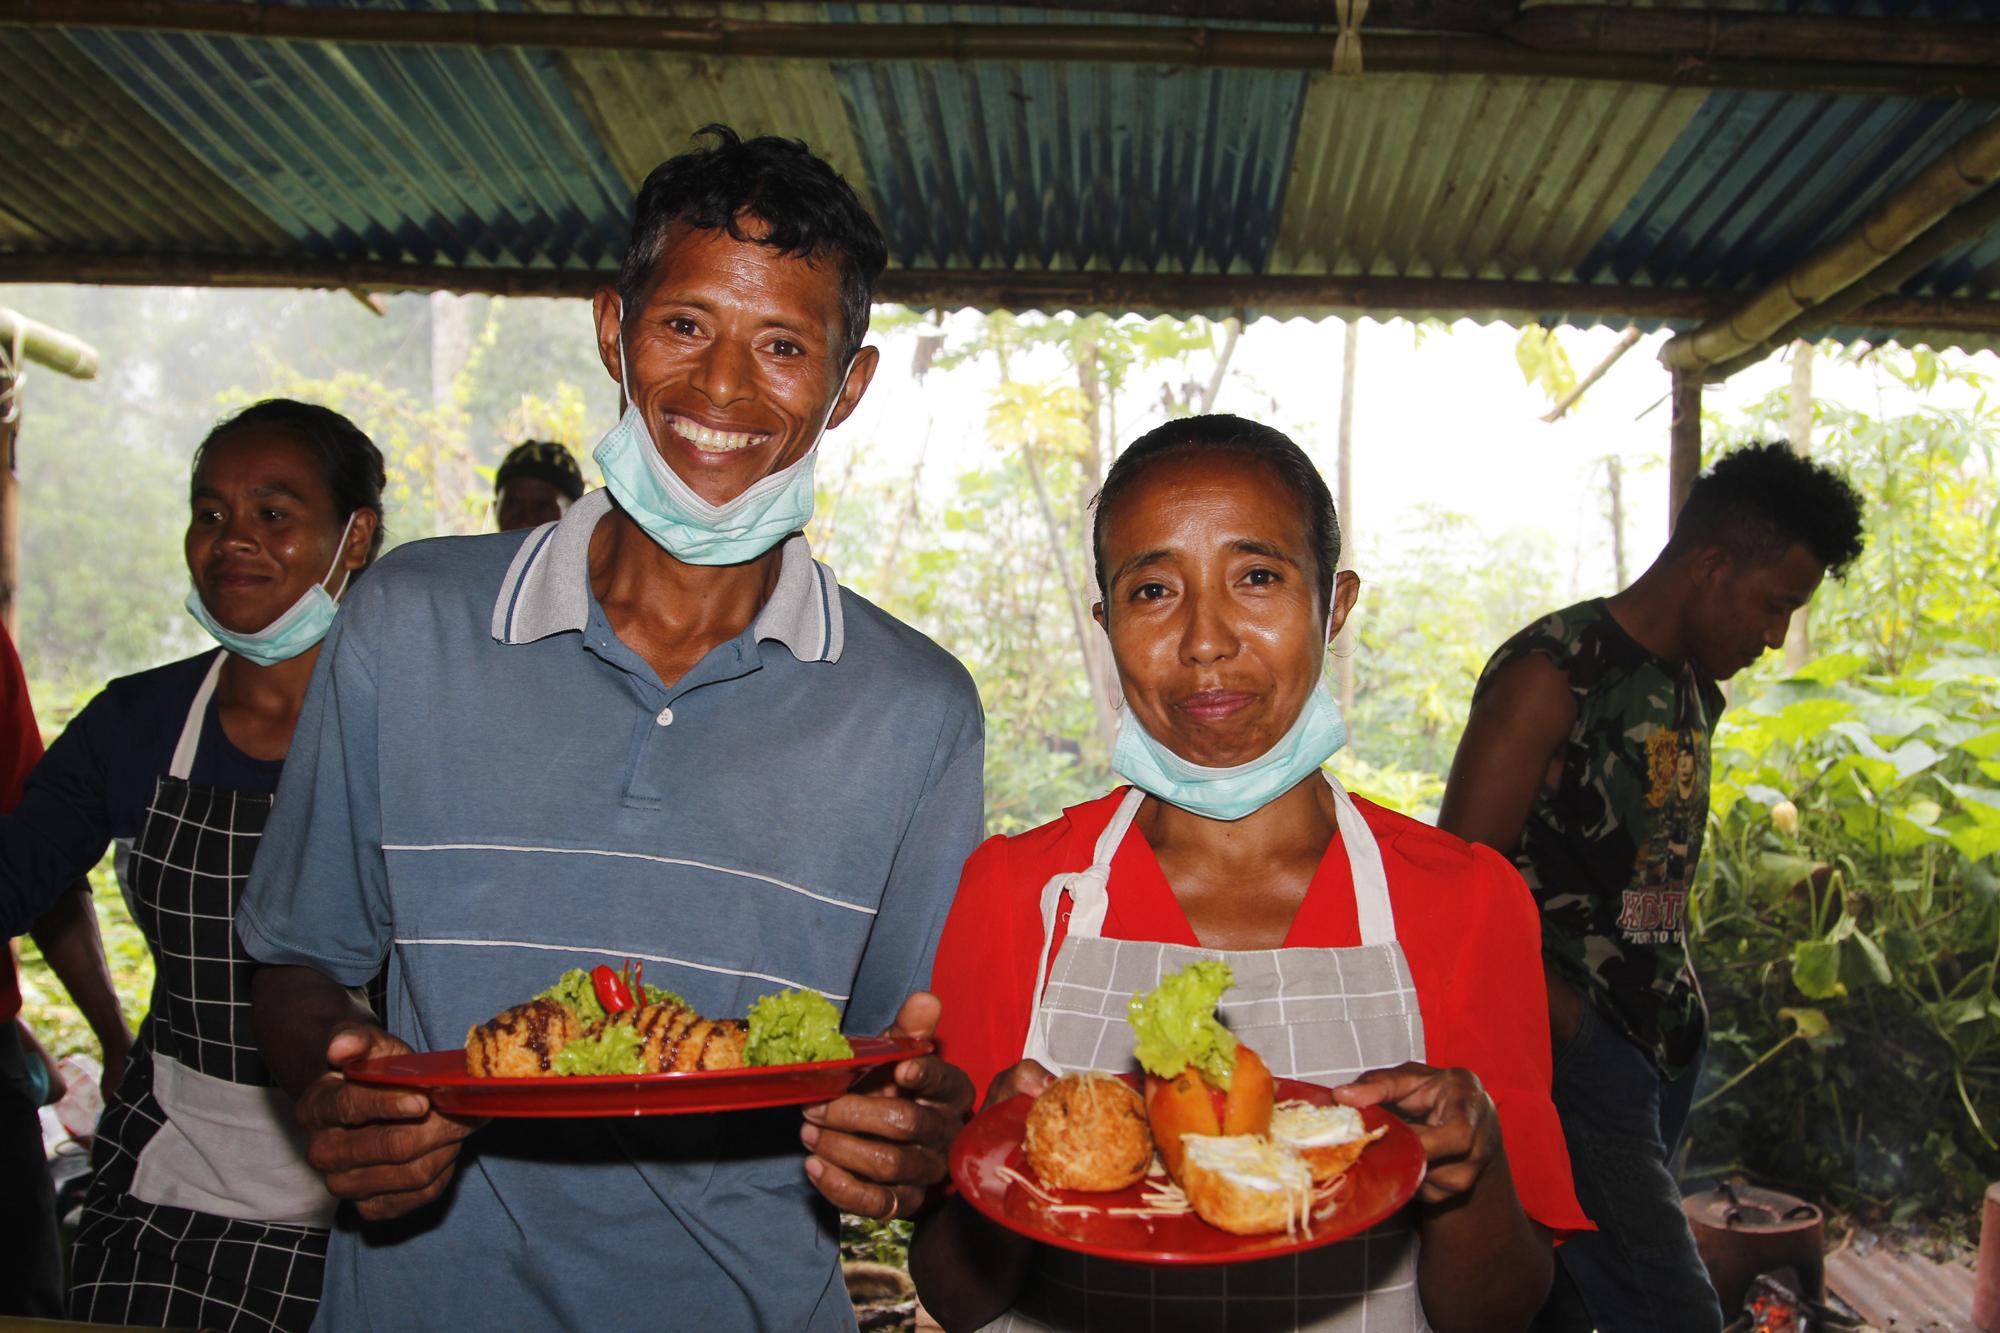 Hermenegildo and Dulce prepared tofu filled with eggs for the cooking competition. Photo: Jaime dos Reis/World Vision